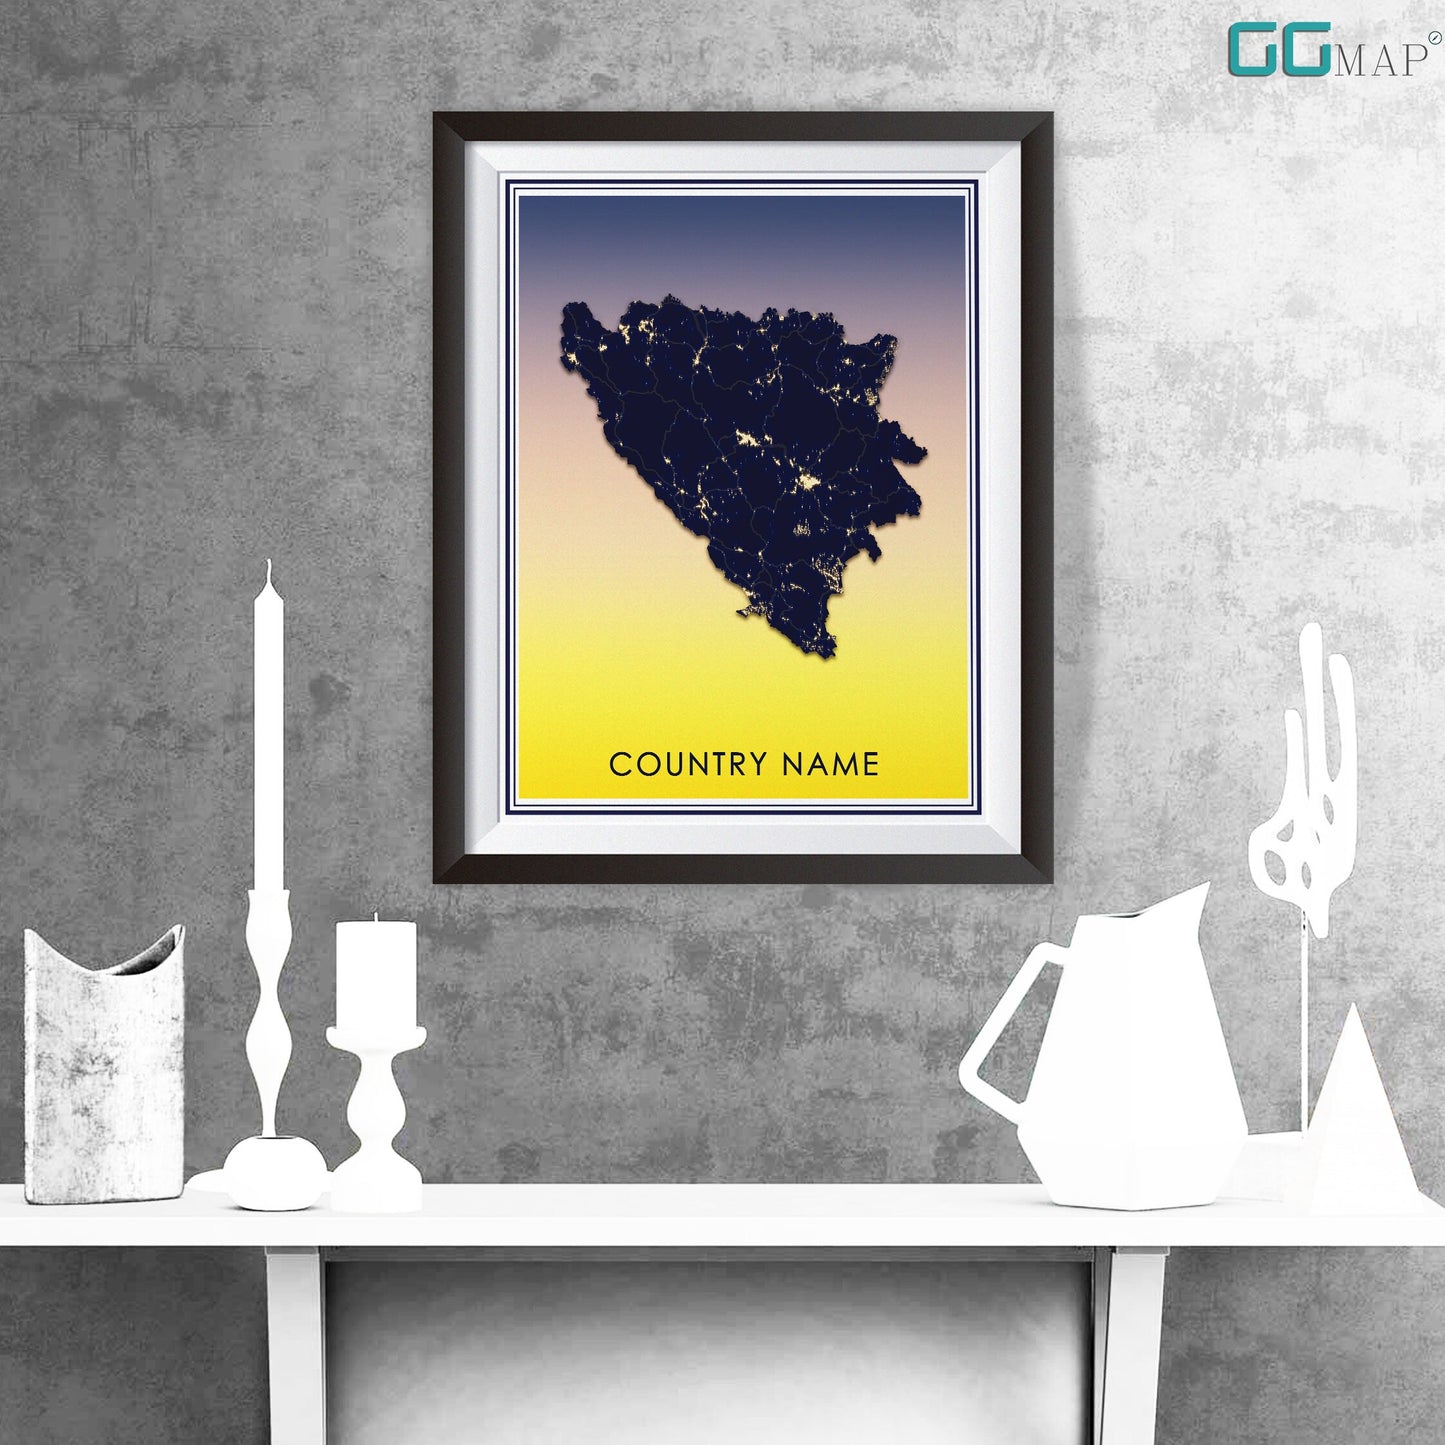 SUNSET Country Map DIGITAL DOWNLOAD - Sunset Country Map - Your contry - Your poster - Personalized -